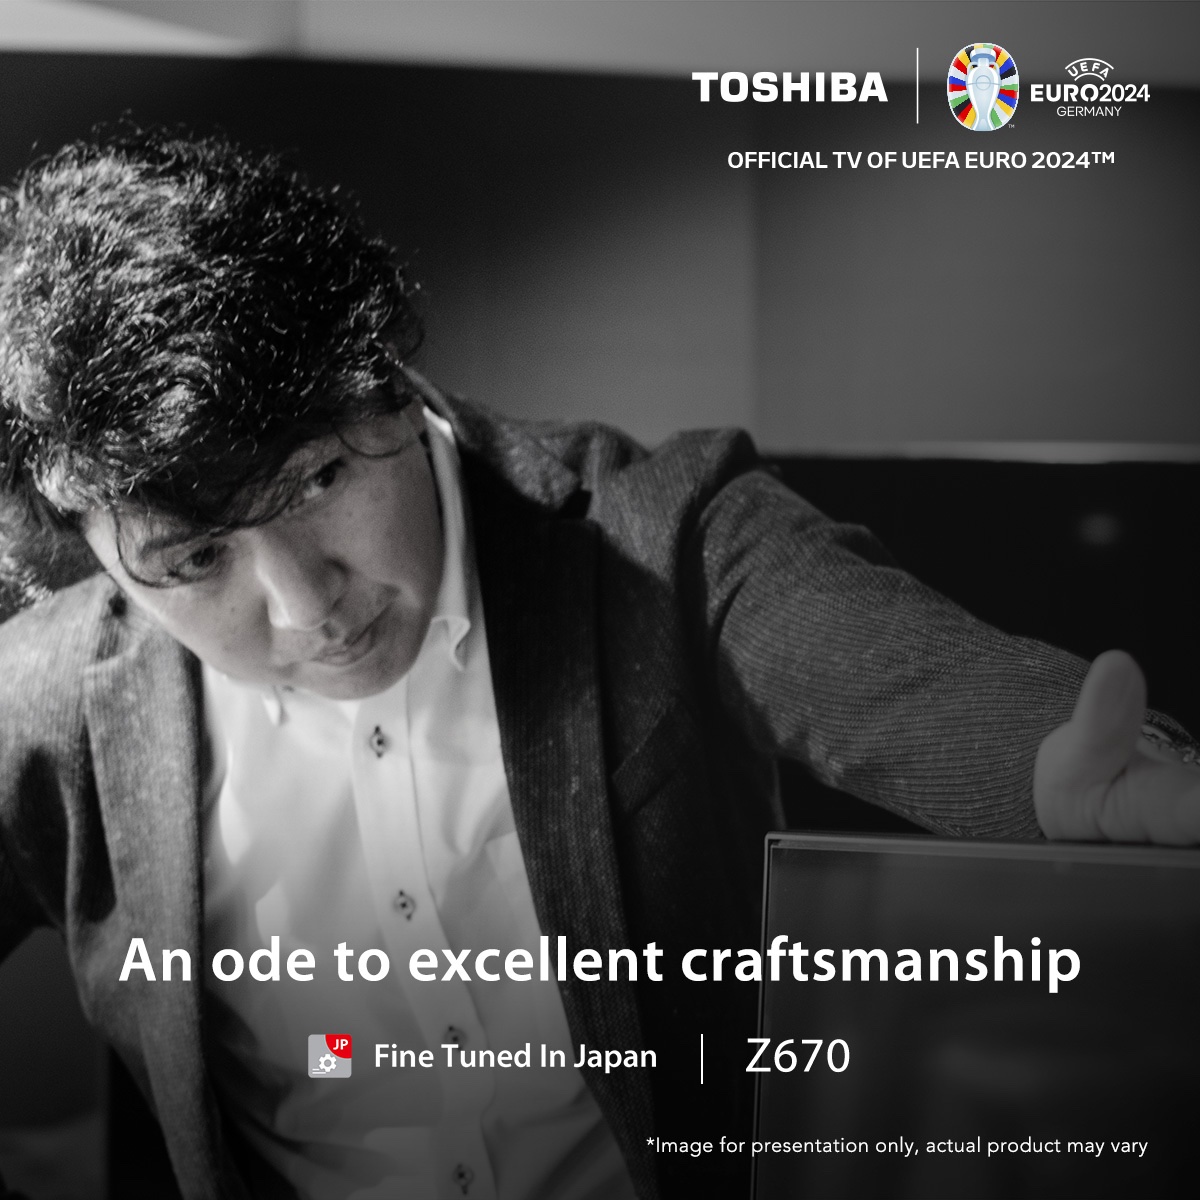 #ToshibaTV is crafted for excellence, embodying 'Essential Beauty.' With over 70 years of rigorous tuning, our quality speaks for itself. Do you remember your first Toshiba product? Share your story, give this post a 'Like' if you value craftsmanship. #BeRealCraftsmanship